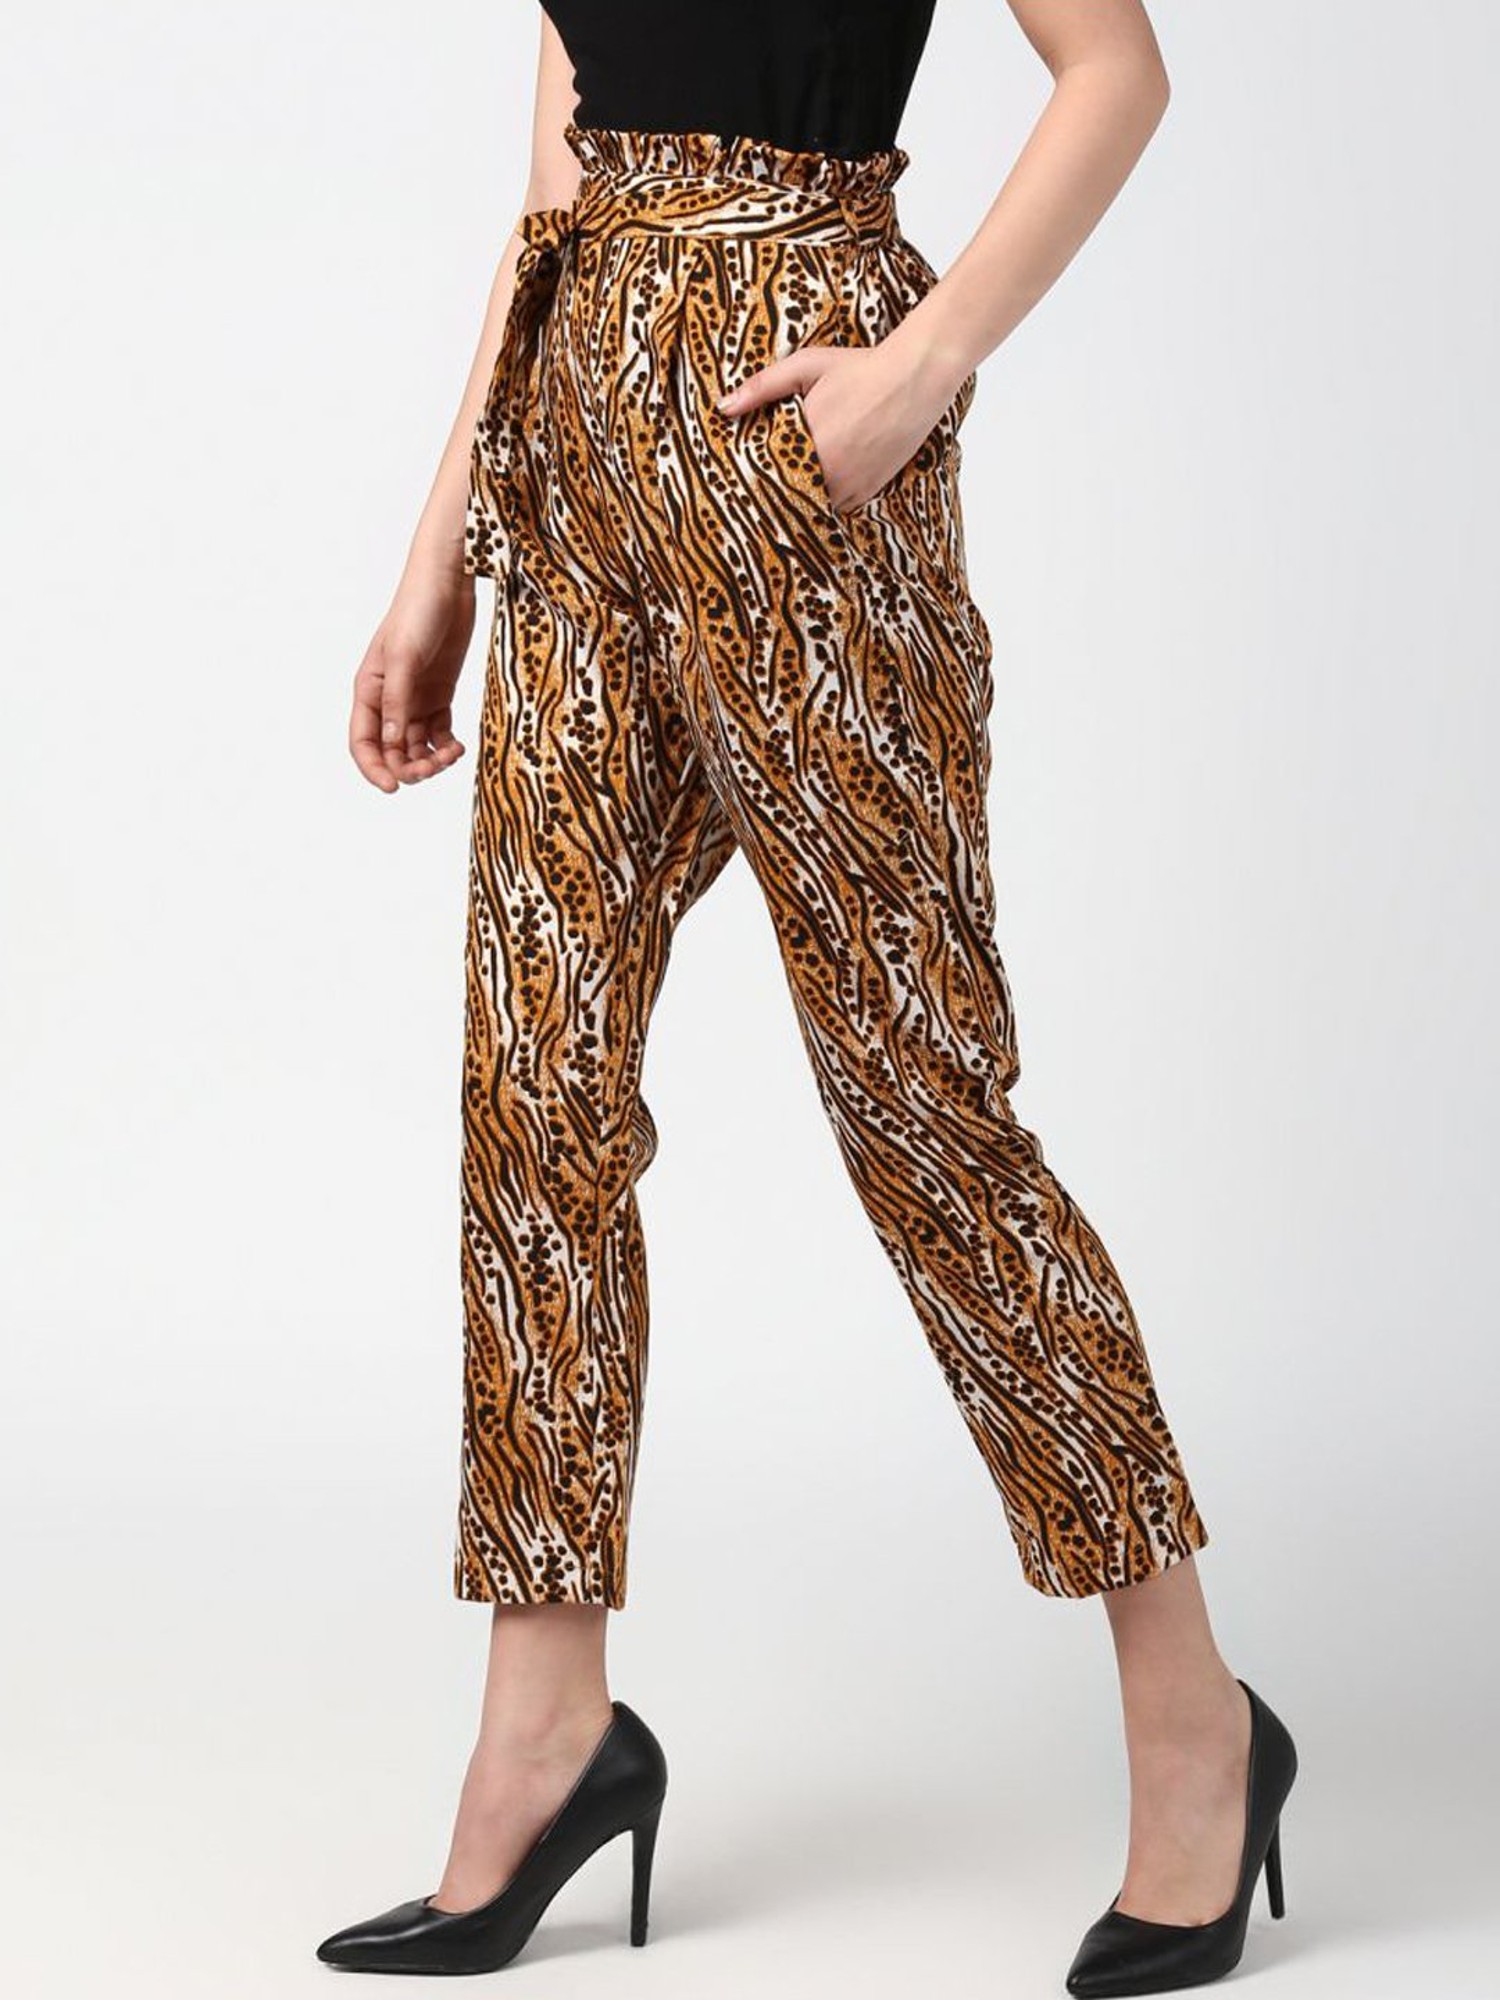 Prowling In Leopard Print Flared Pants – pinupgirlclothing.com